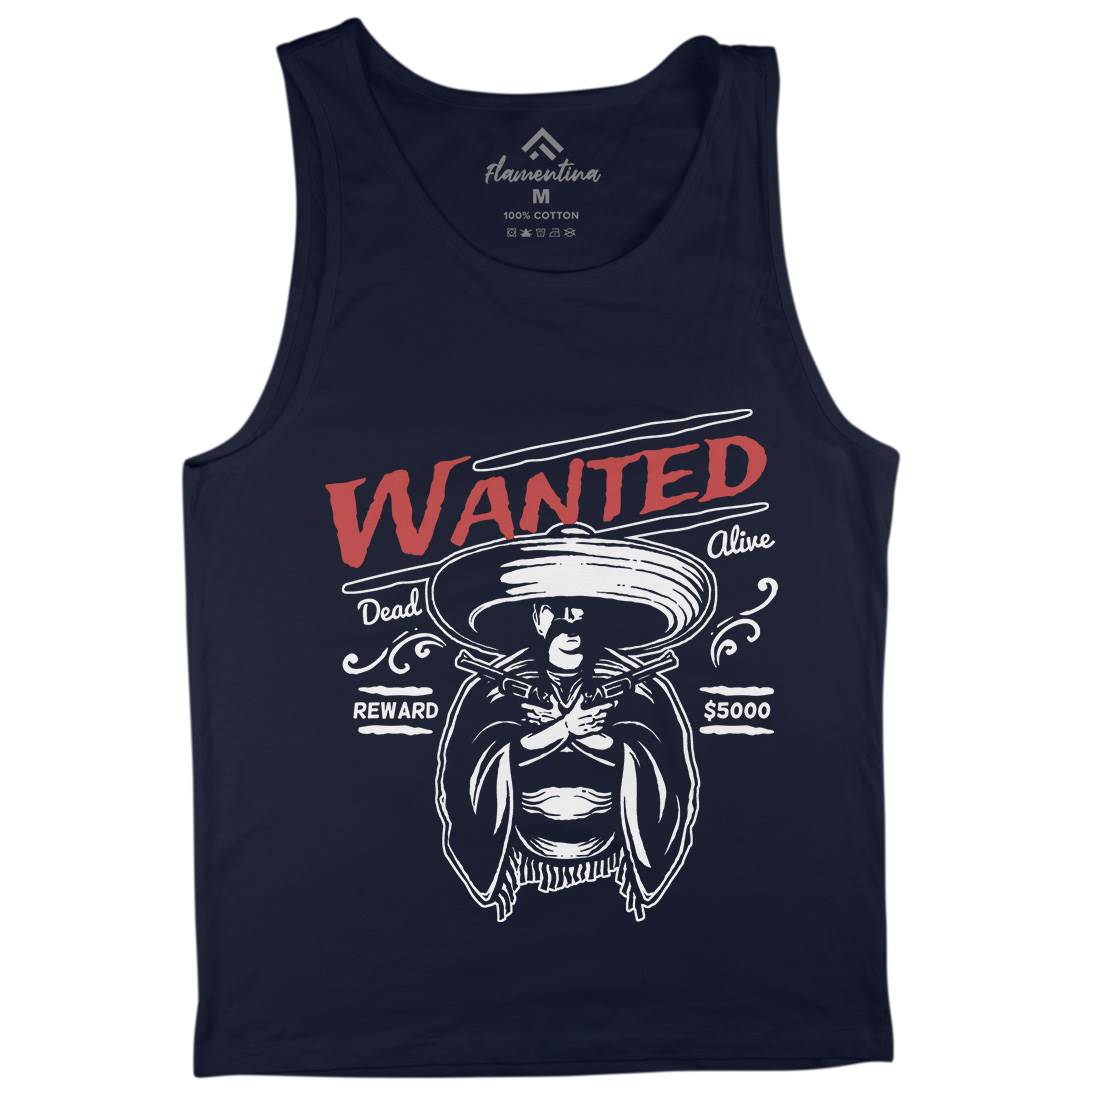 Wanted Mens Tank Top Vest American A391